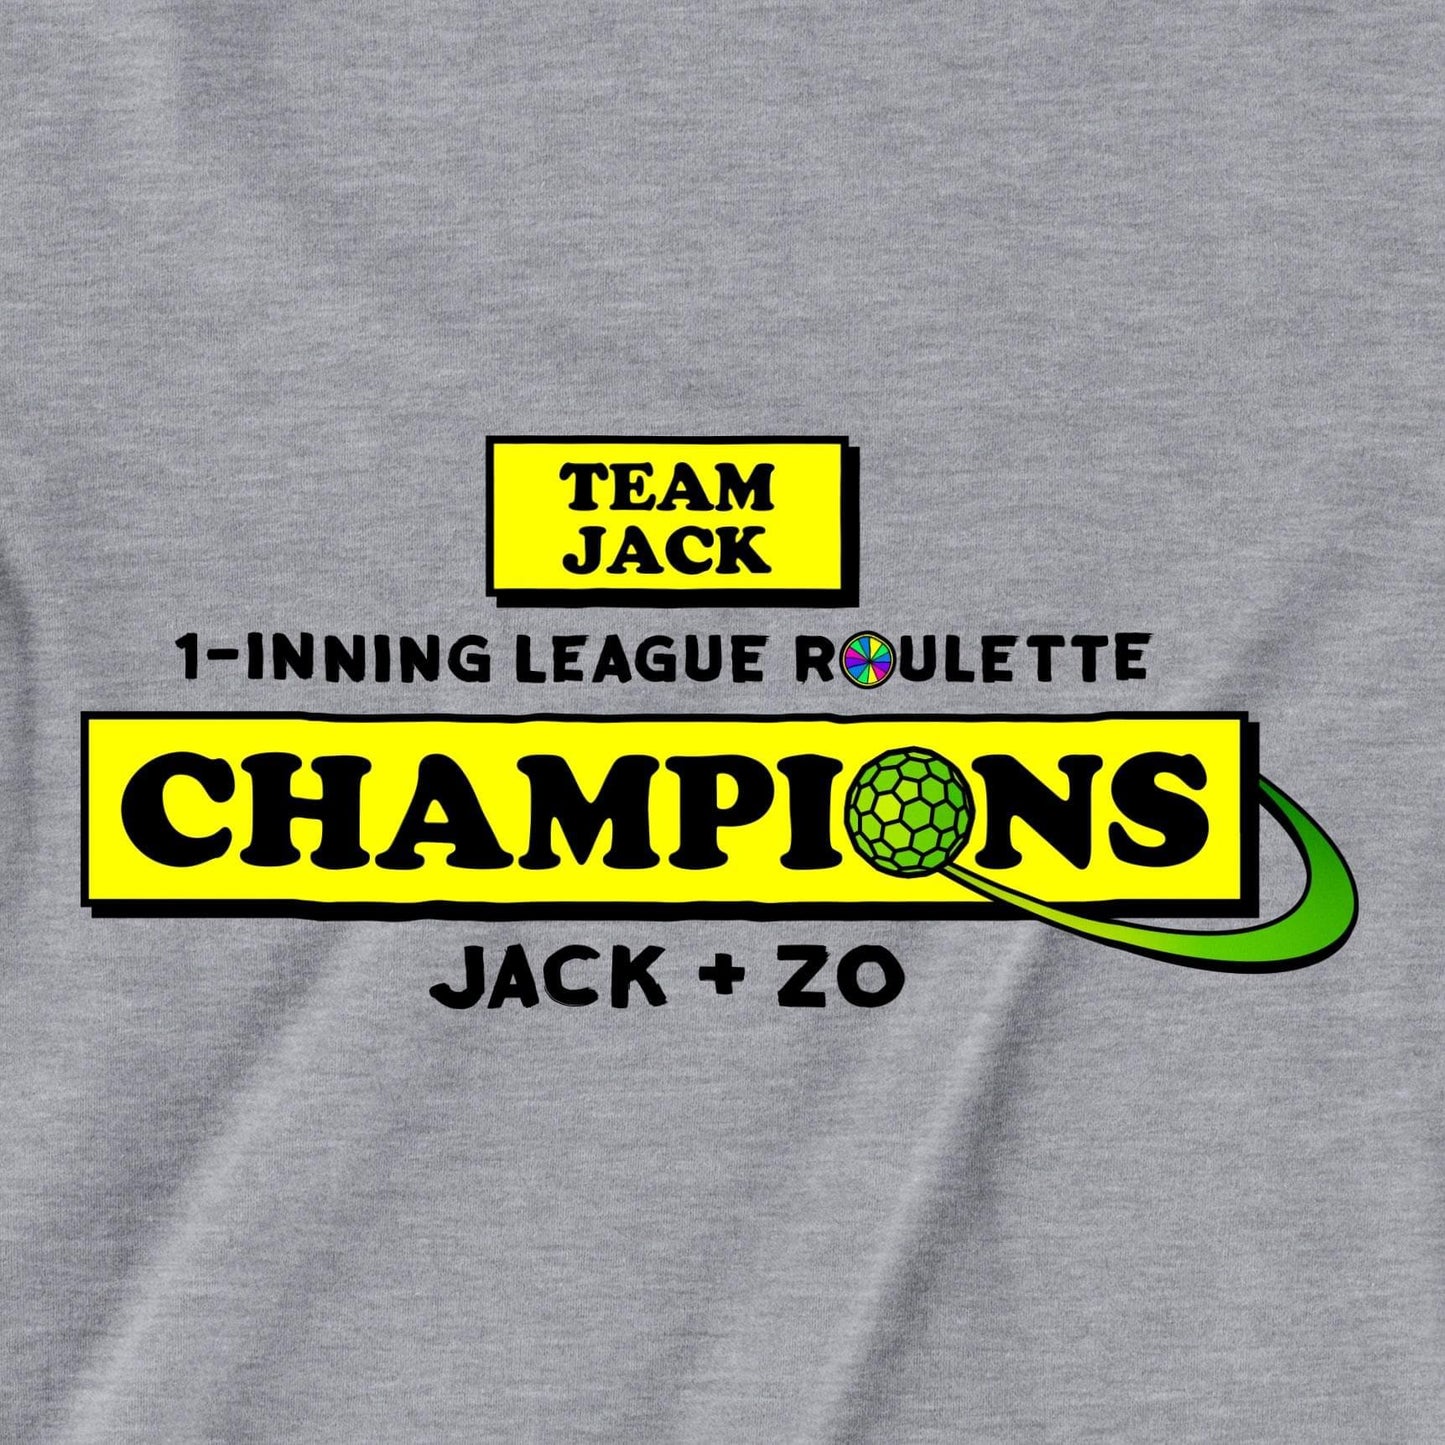 1-Inning League Roulette Champs | T-Shirt